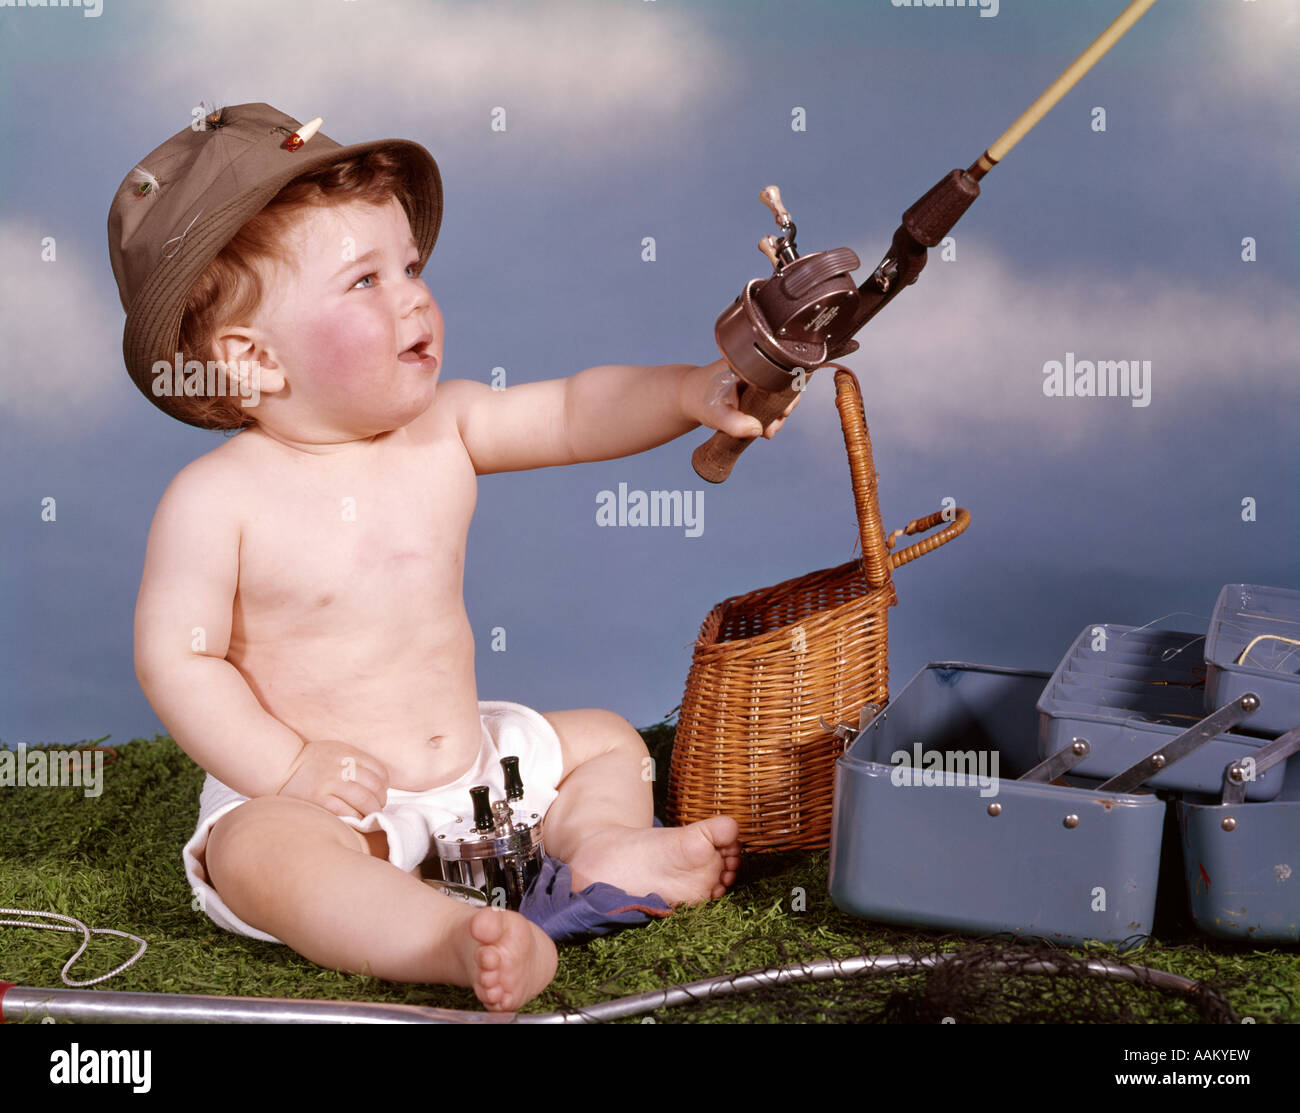 BABY WITH FISHING HAT AND GEAR HOLDING FISHING ROD STUDIO TACKLE